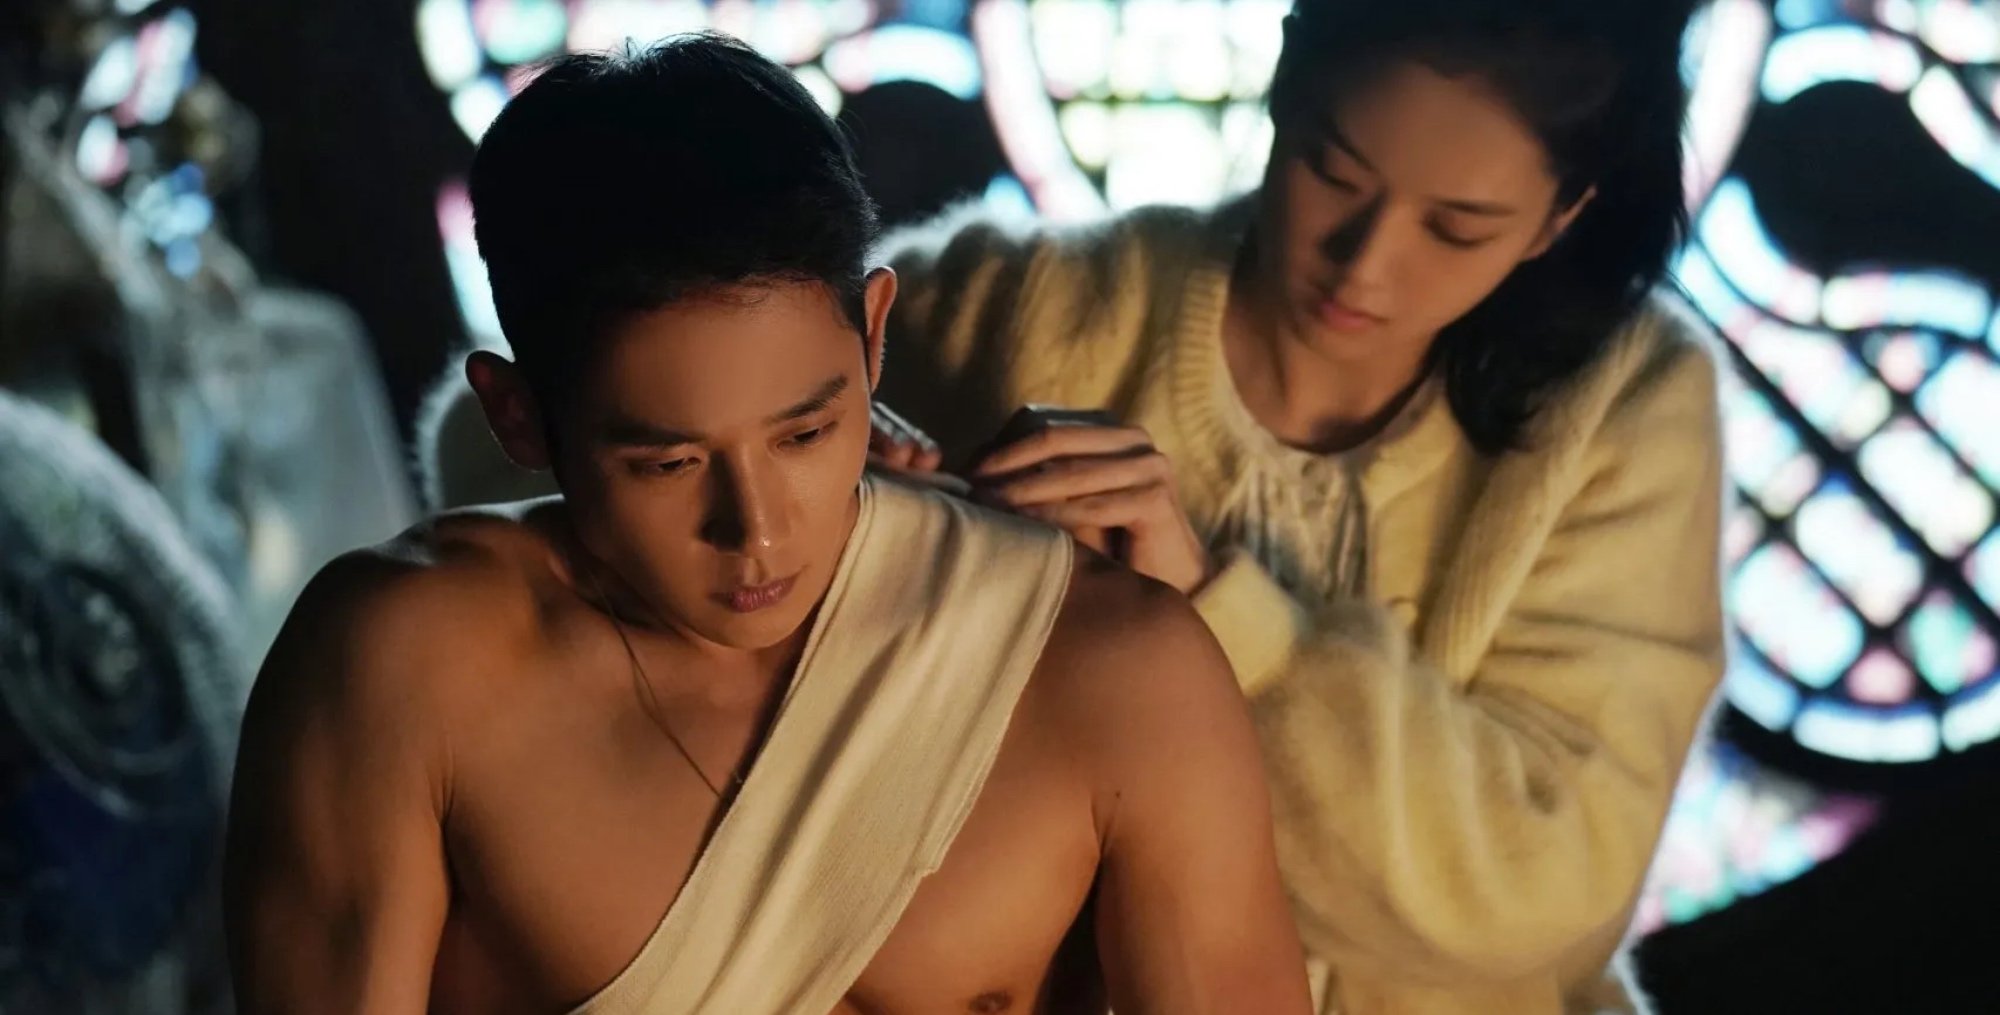 Actor Jung Hae-in as Im-soo in 'Snowdrop' shirtless and getting shoulder bandaged.